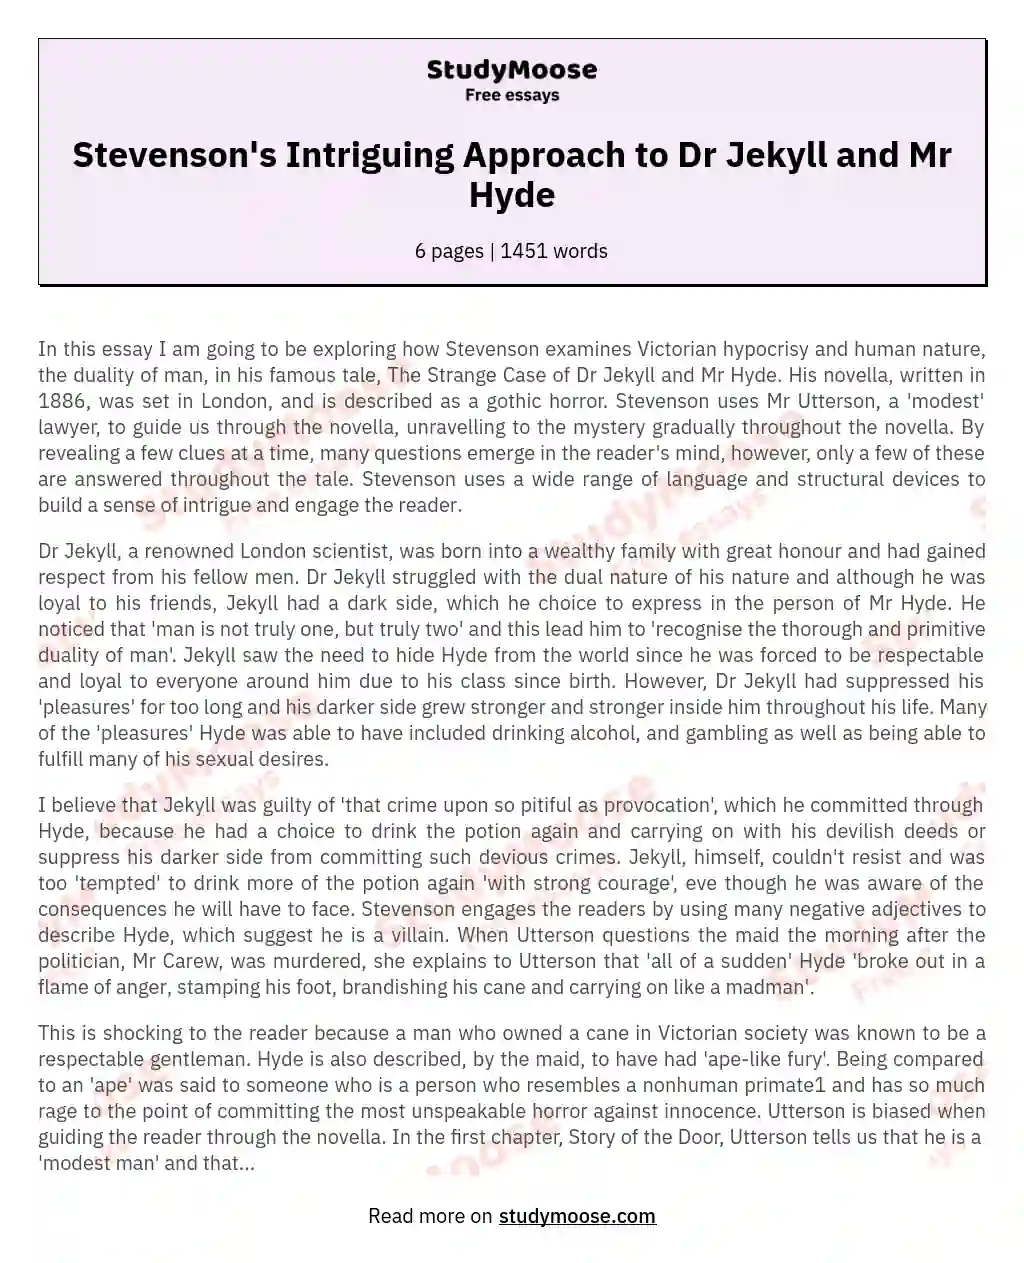 How Stevenson Creates a Sense of Intrigue and Engages the Reader's Interest in Dr Jekyll and Mr Hyde?